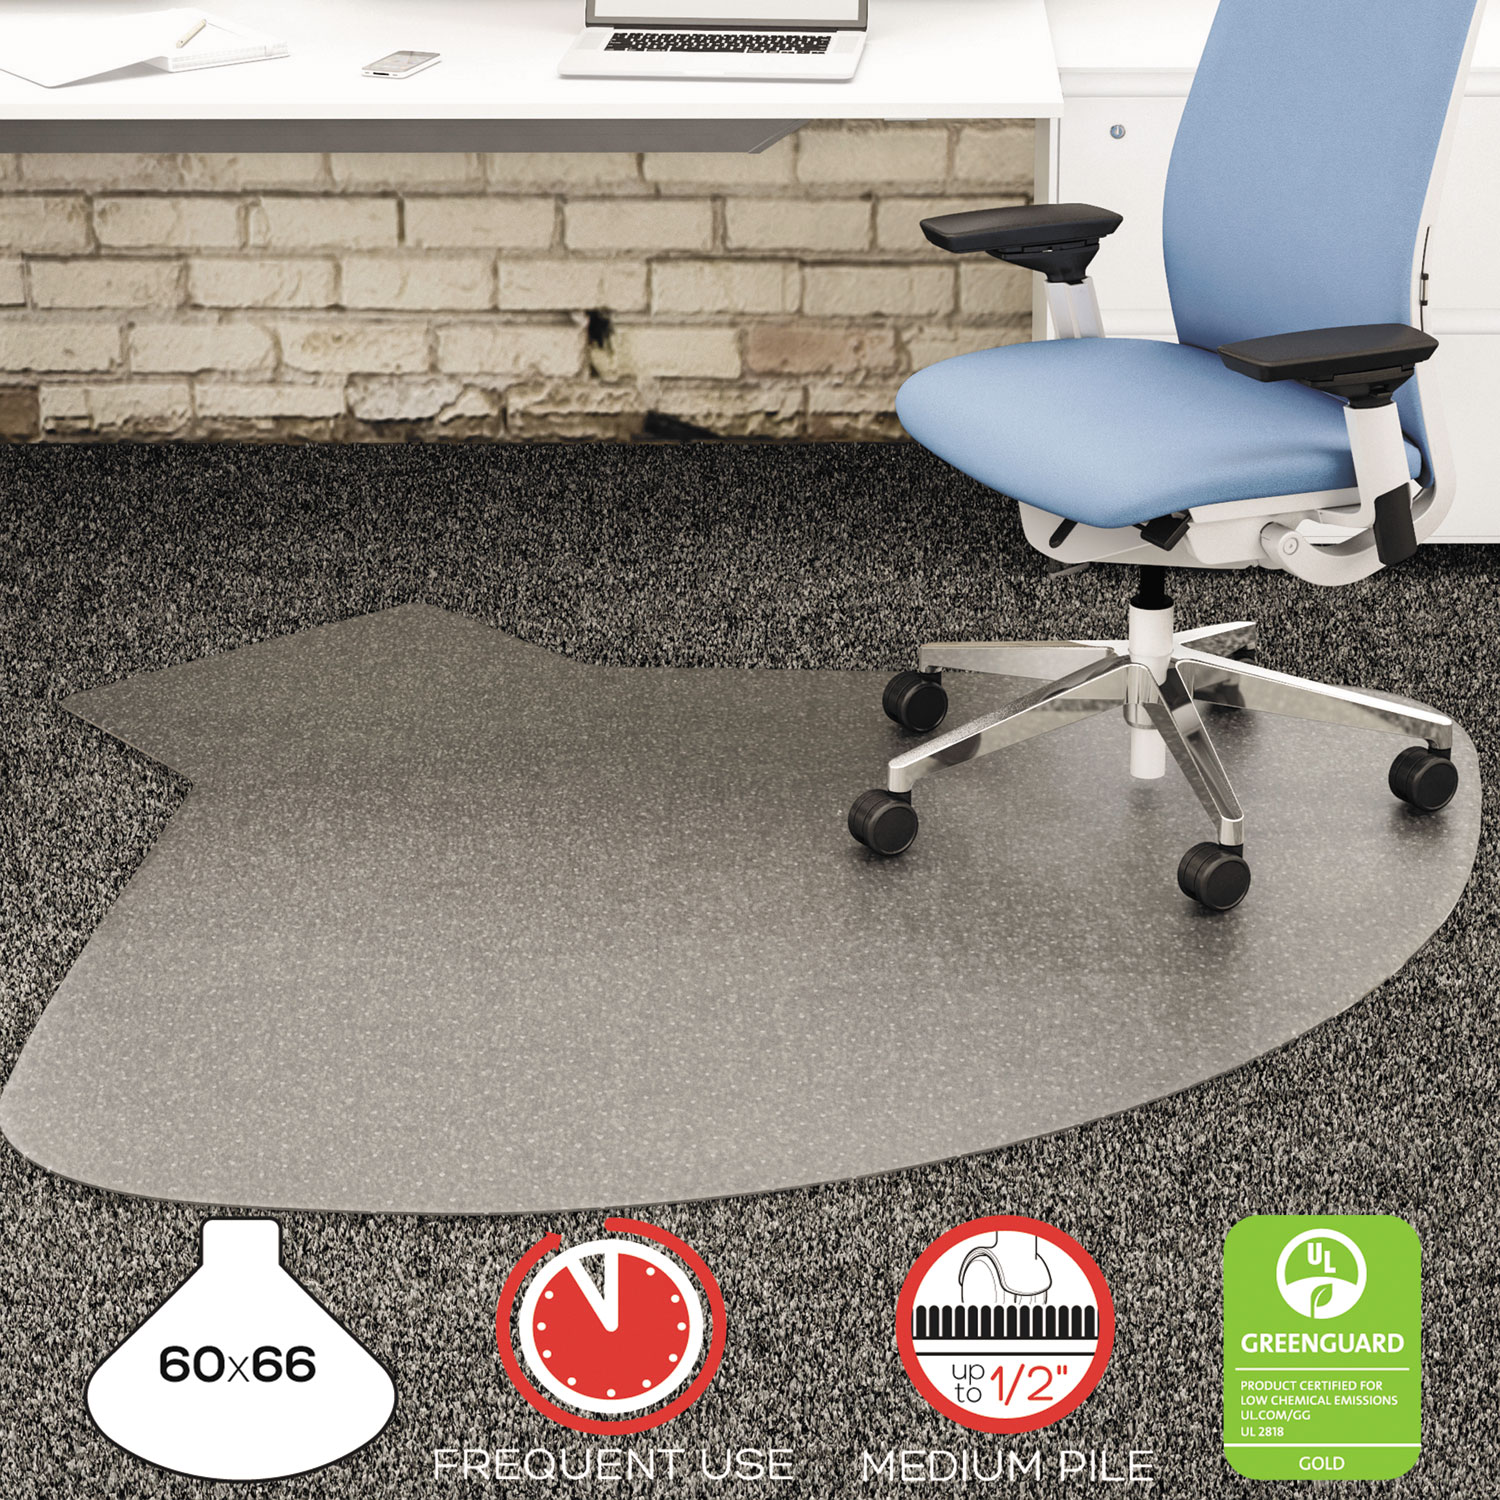 SuperMat Frequent Use Chair Mat, Medium Pile Carpet, Straight,60x66 w/Lip, Clear